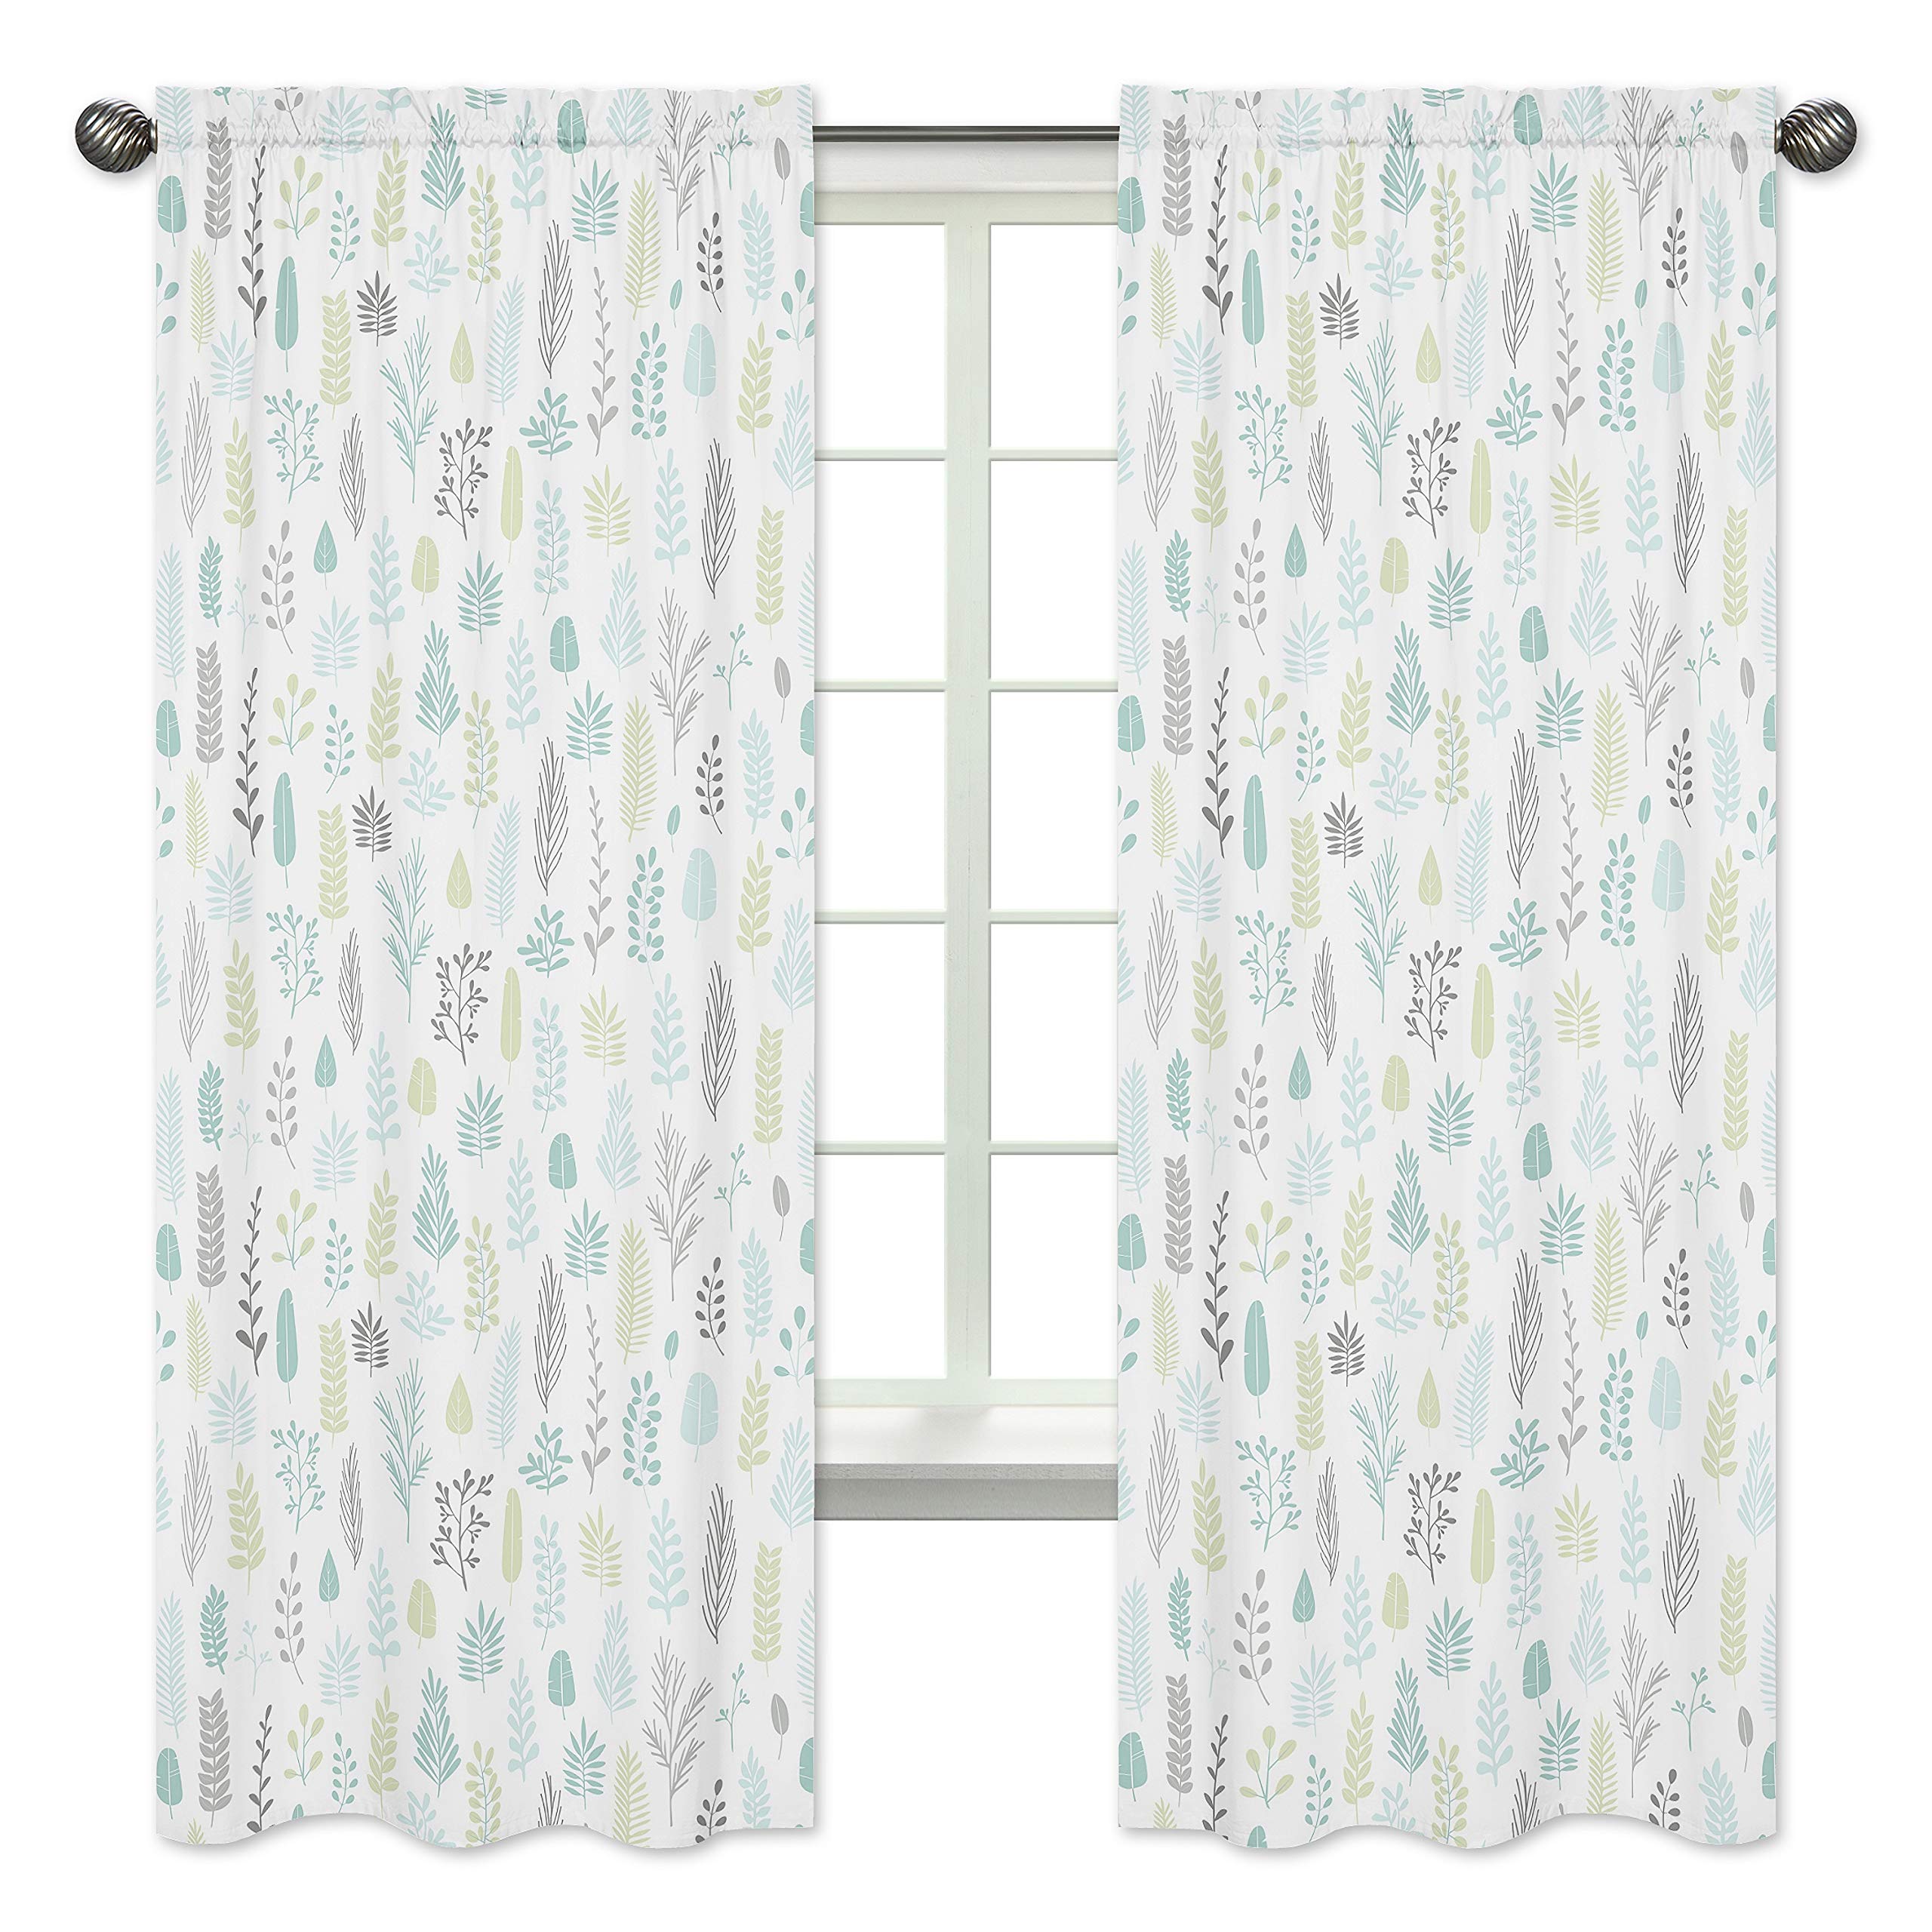 Sweet Jojo Designs Blue and Grey Tropical Leaf Window Treatment Panels Curtains - Set of 2 - Turquoise, Gray and Green Botanical Rainforest Jungle ...